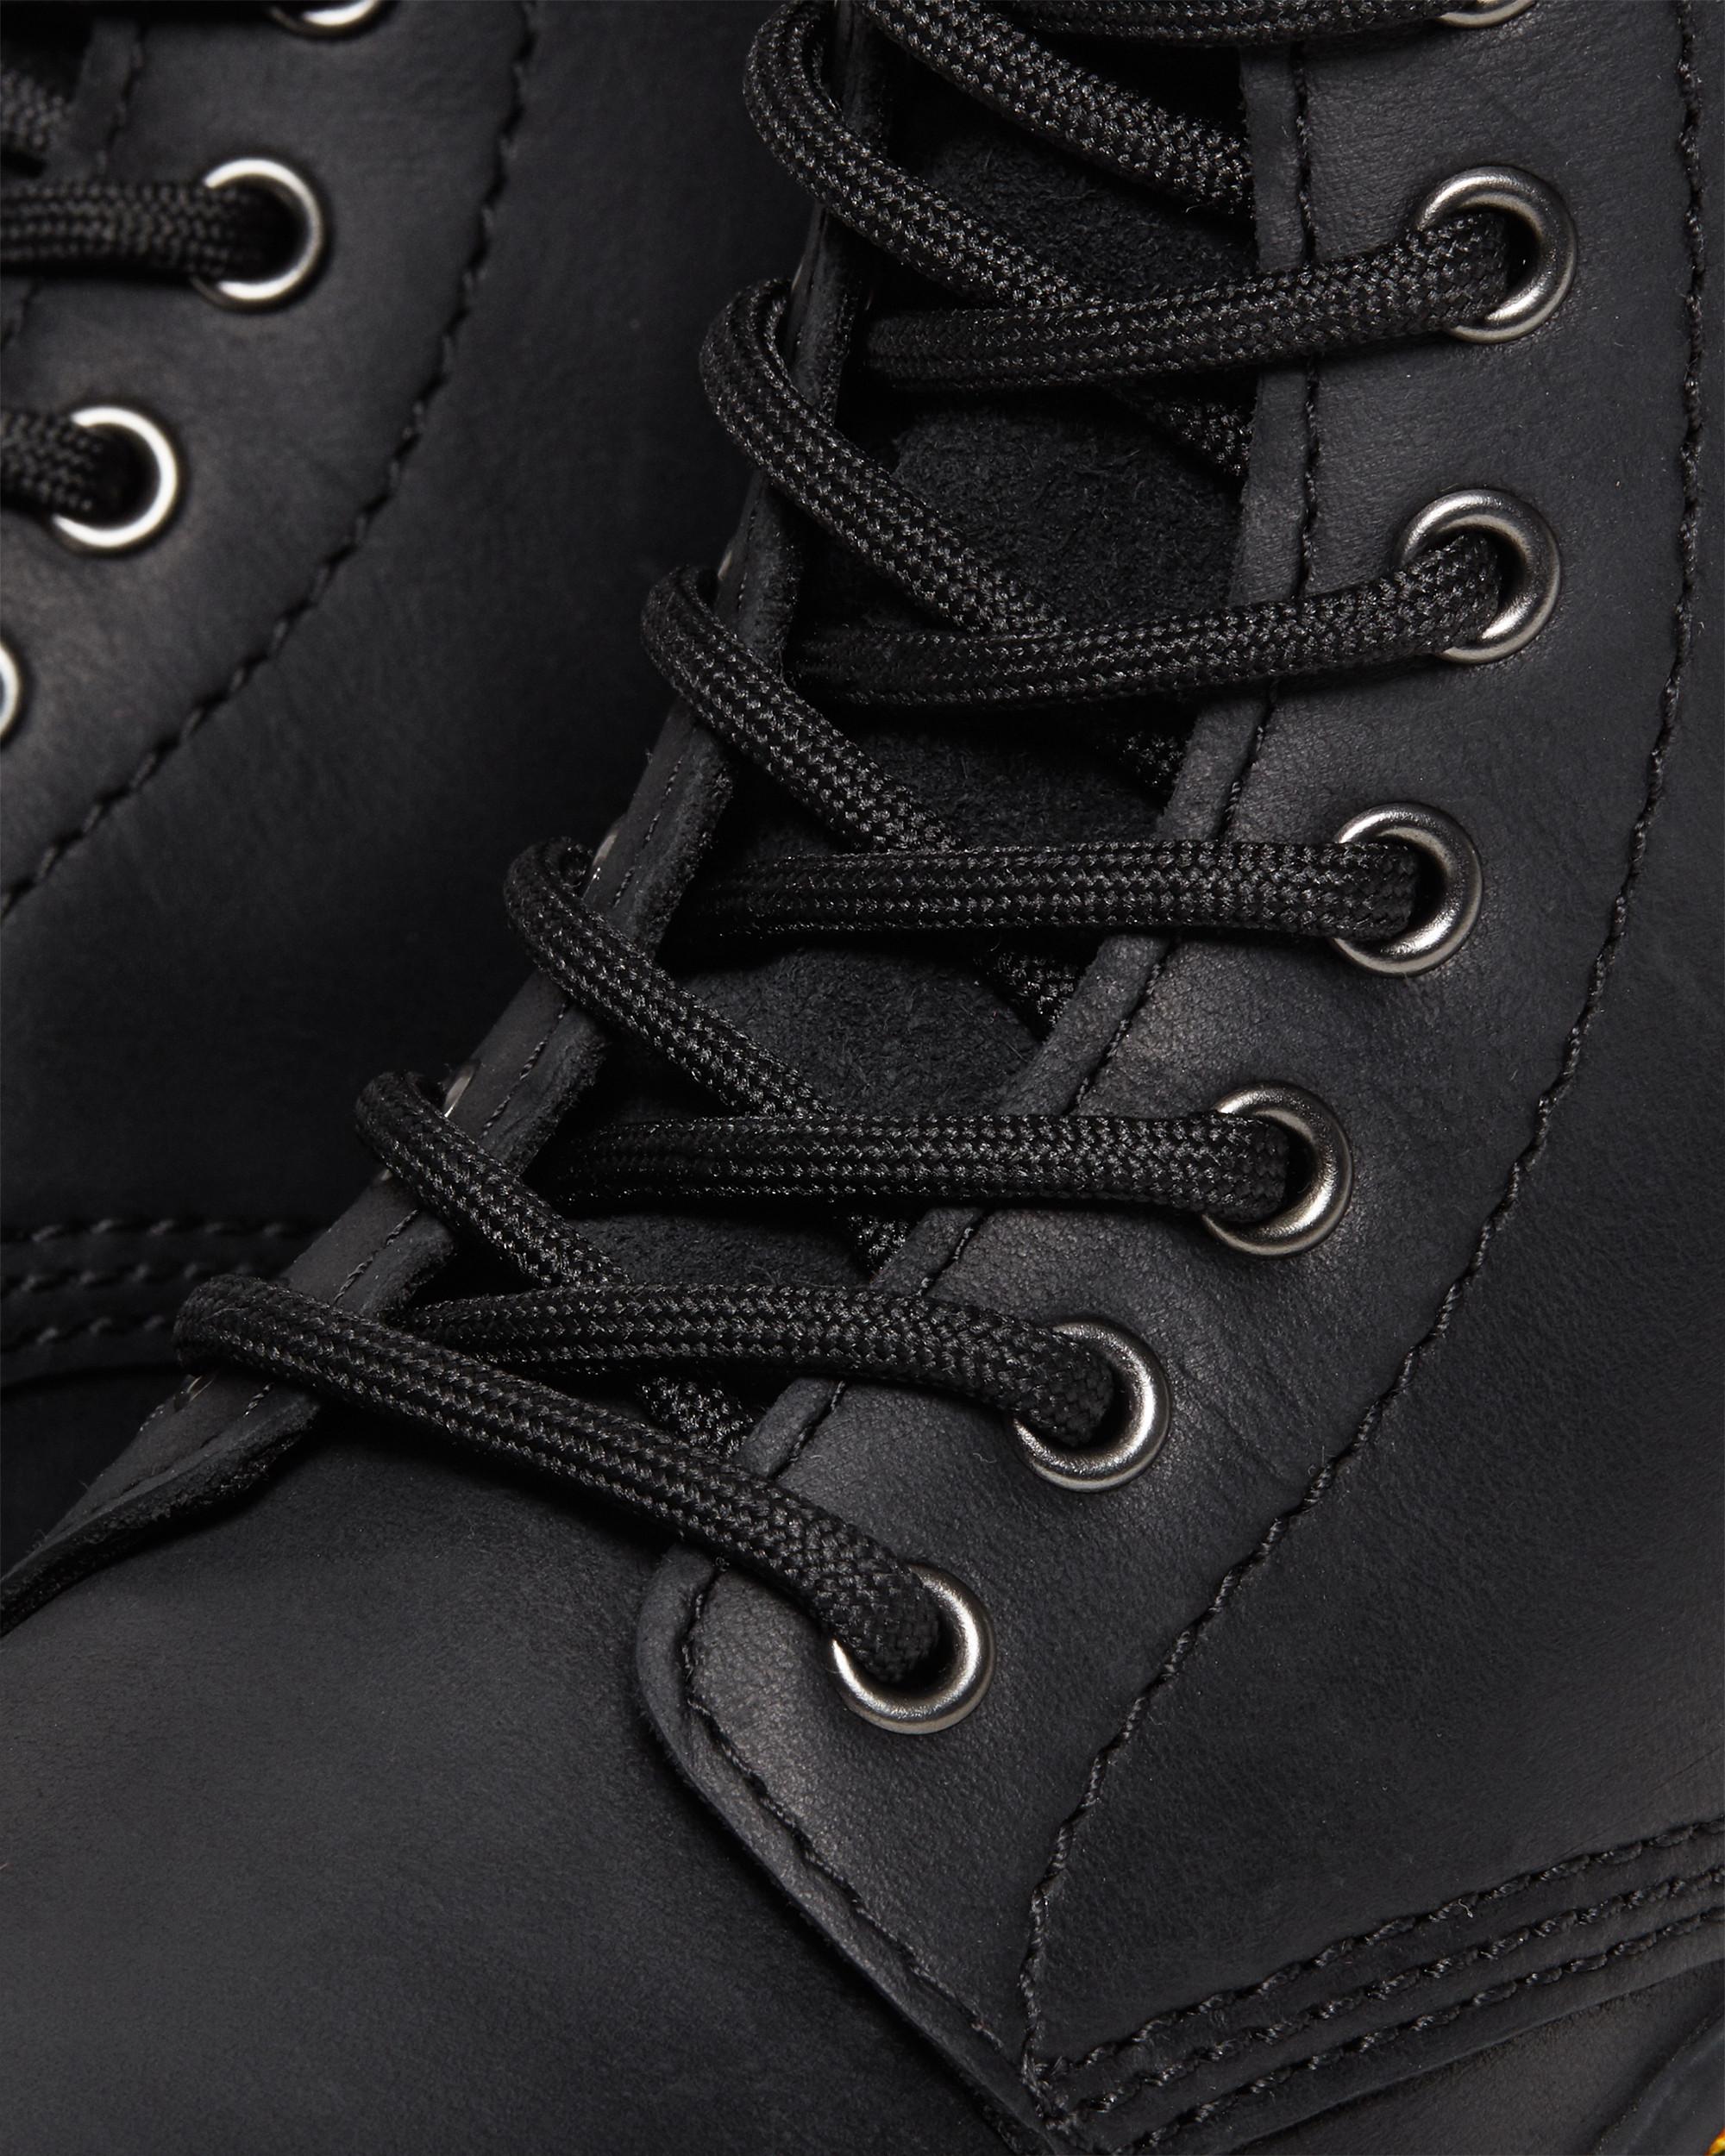 Junior 1460 Wintergrip Suede Lace Up Boots in Black